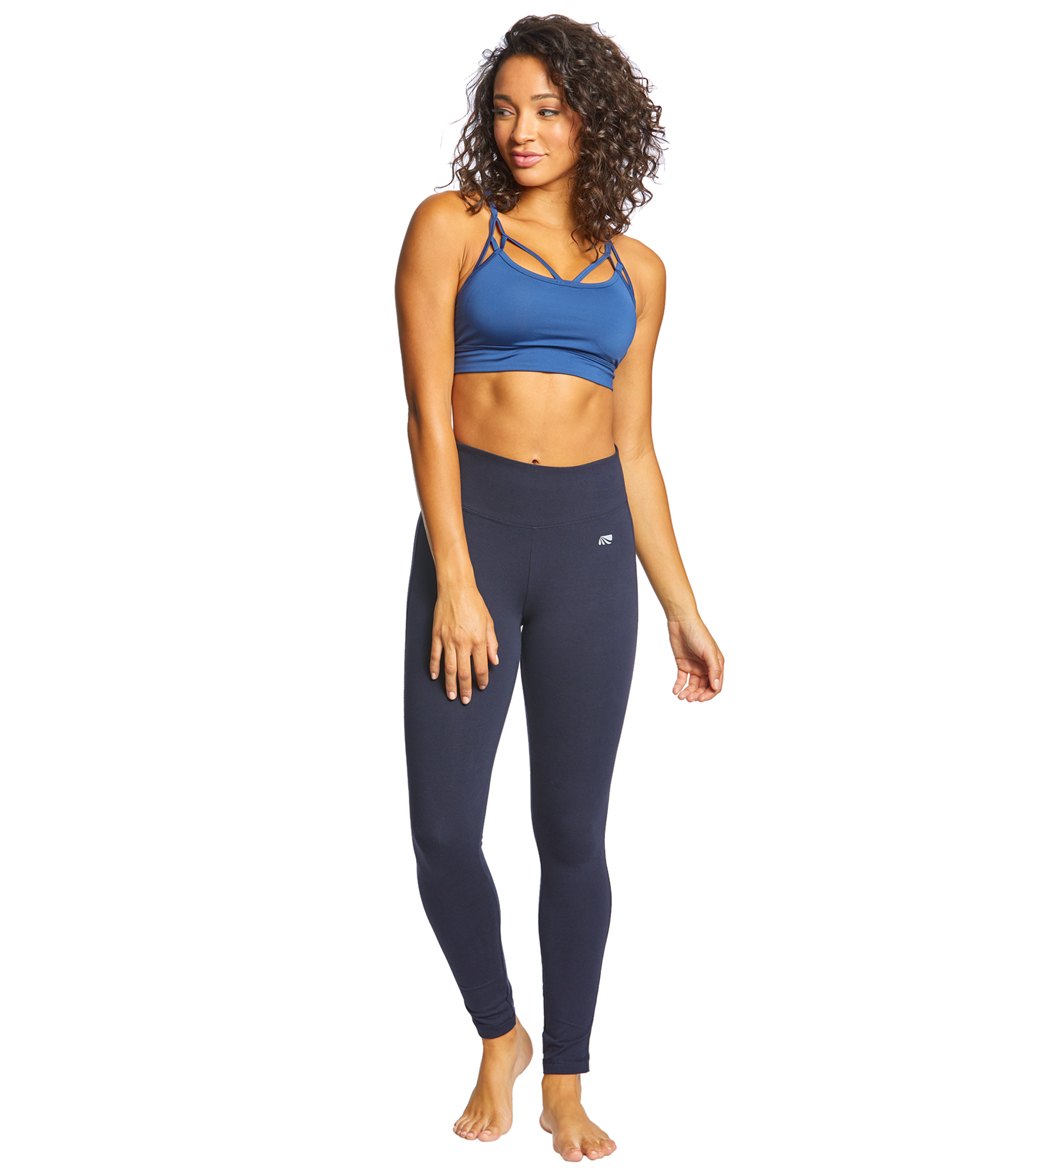  M MOYOOGA Seamless Legging for Women High Waist Tummy Control  Workout Gym Sport Active Yoga Fitness Pants (Small, Blue Marl) : Sports &  Outdoors